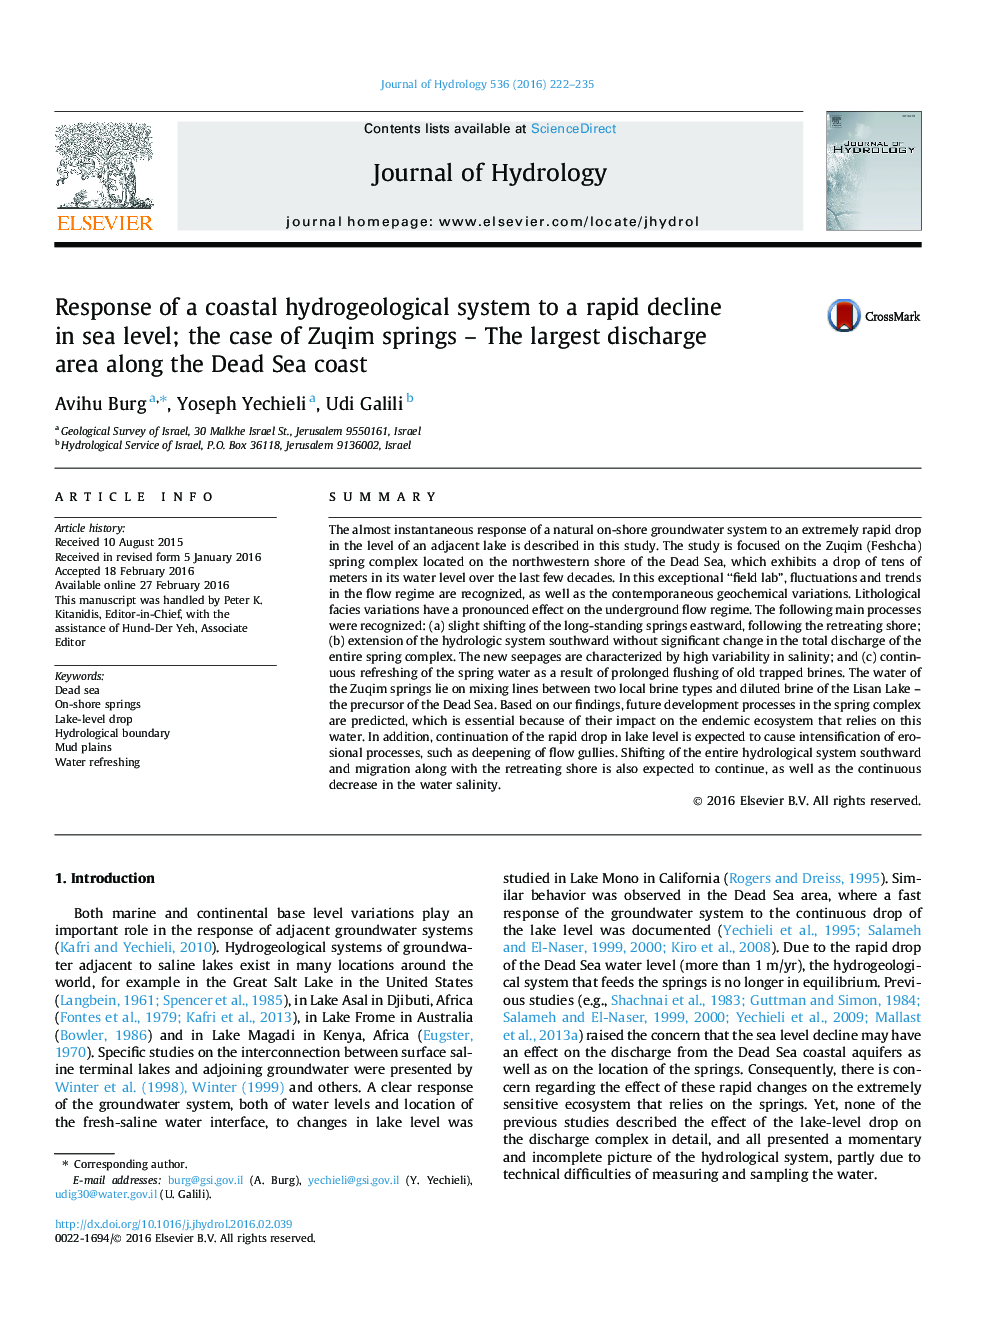 Response of a coastal hydrogeological system to a rapid decline in sea level; the case of Zuqim springs - The largest discharge area along the Dead Sea coast